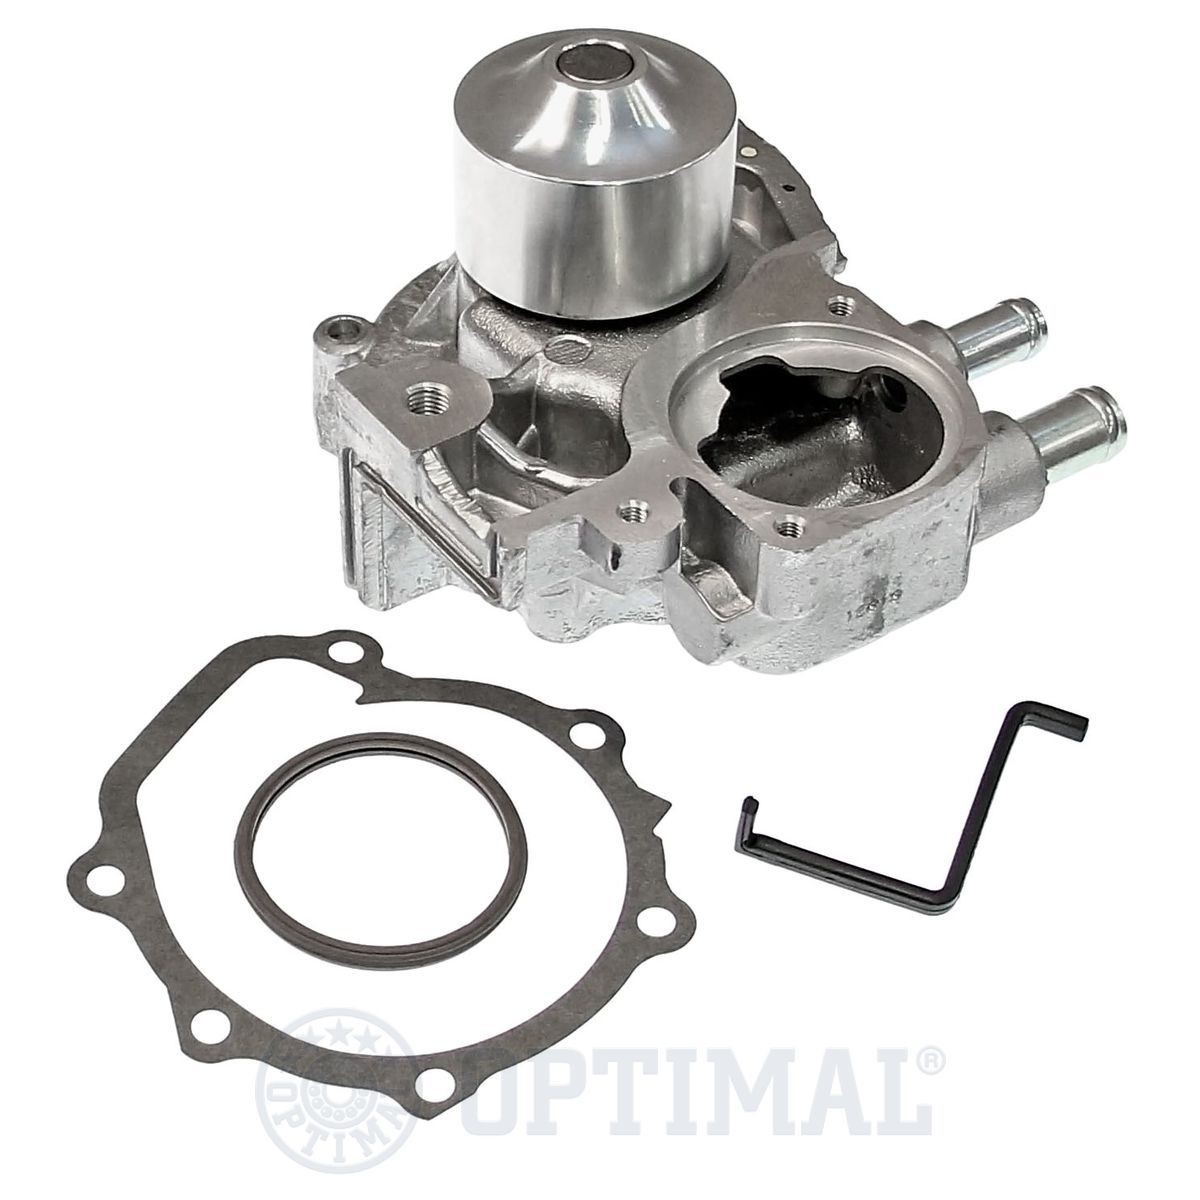 OPTIMAL Water pump for engine AQ-2234